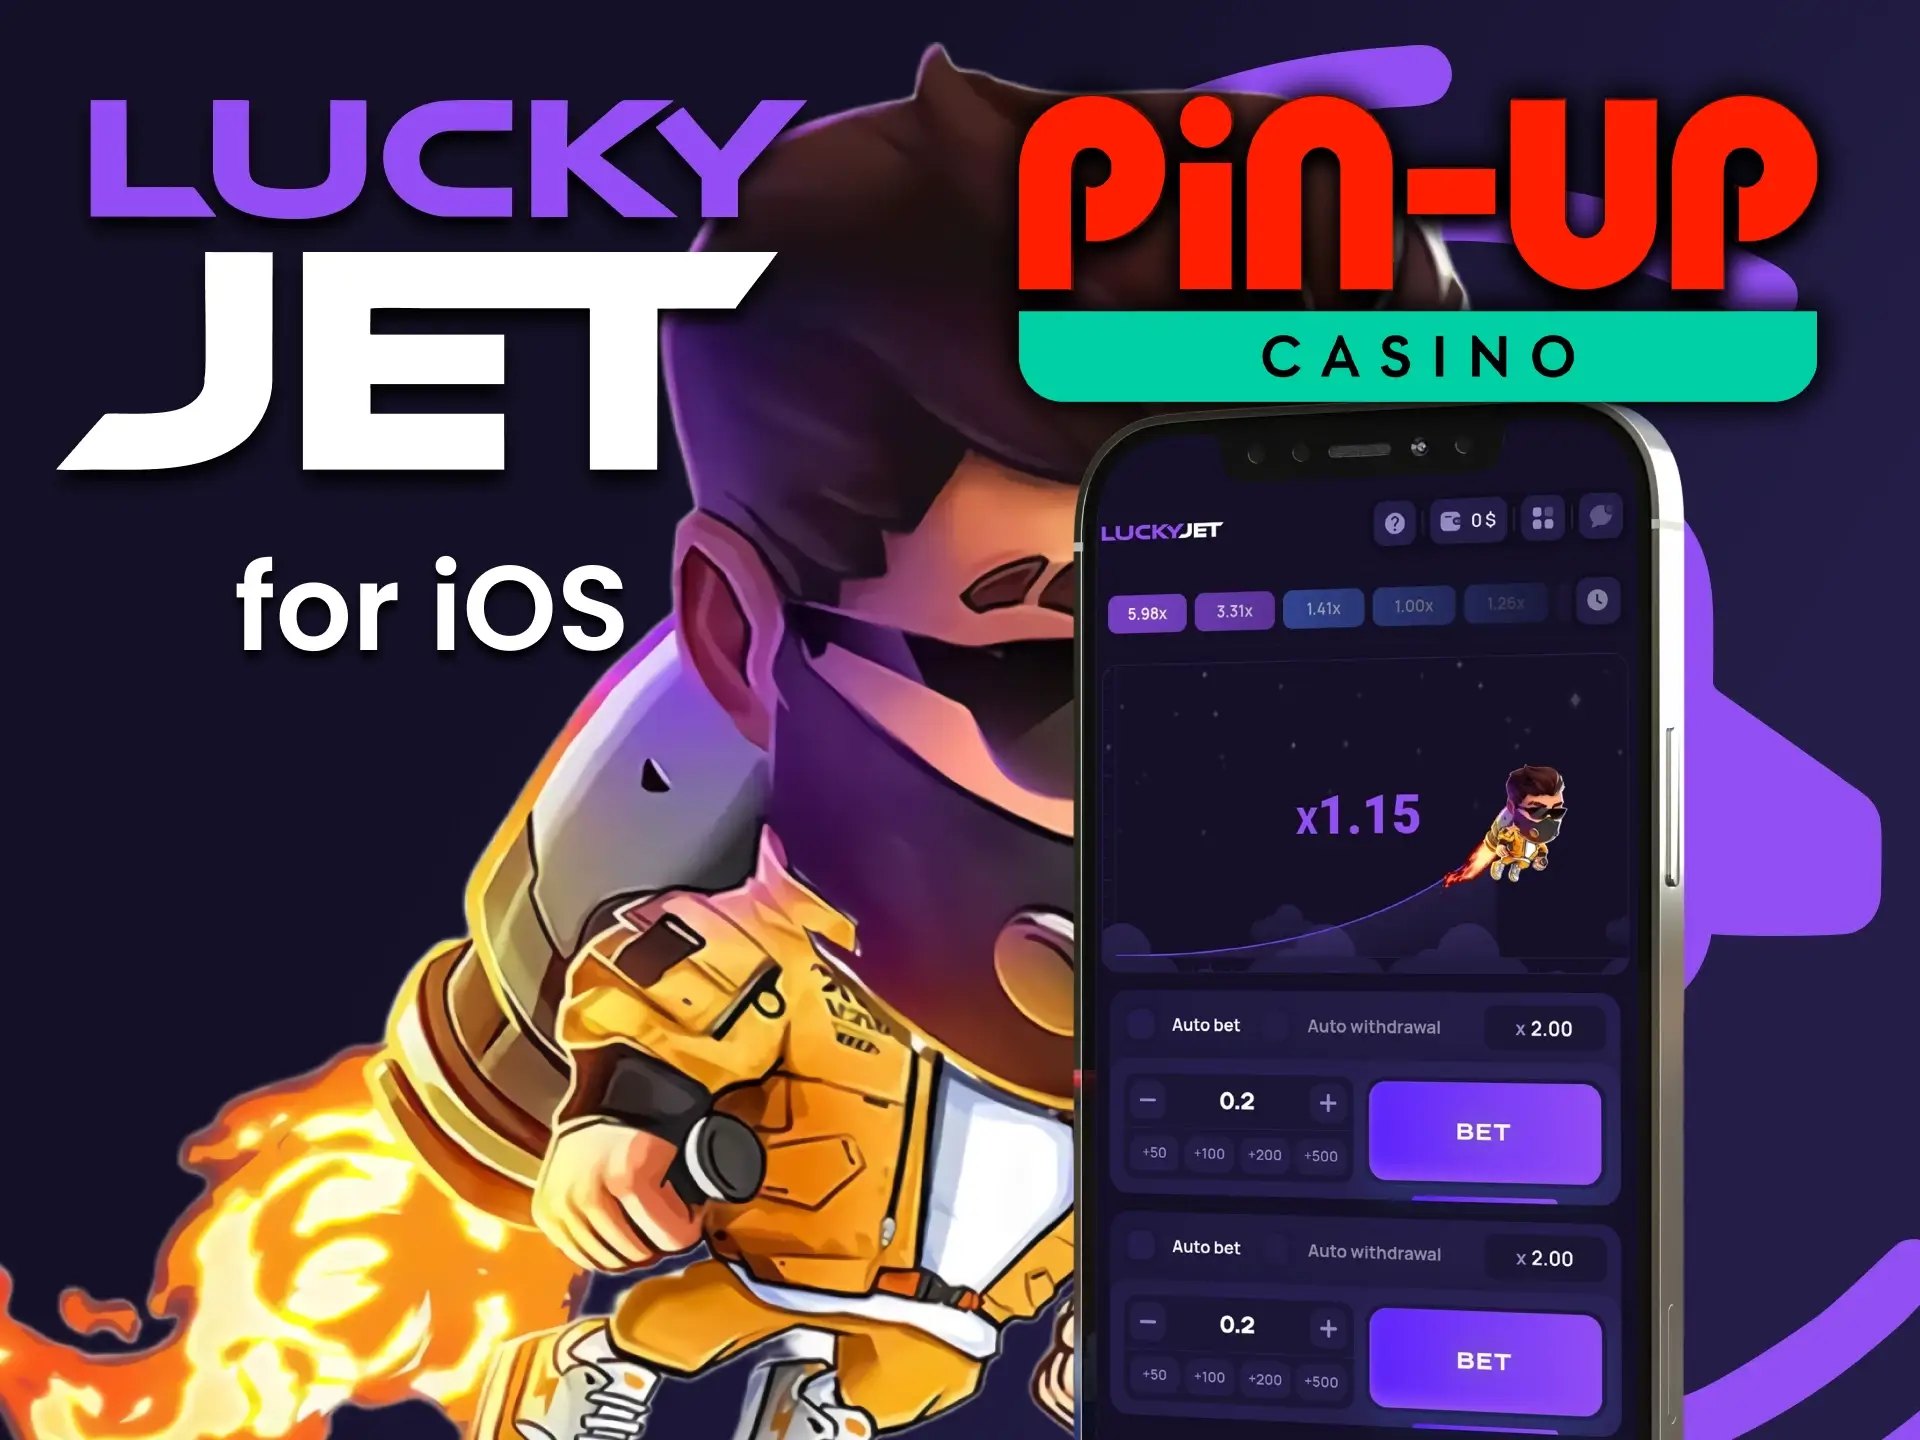 Download the Pin Up iOS app to play Lucky Jet.